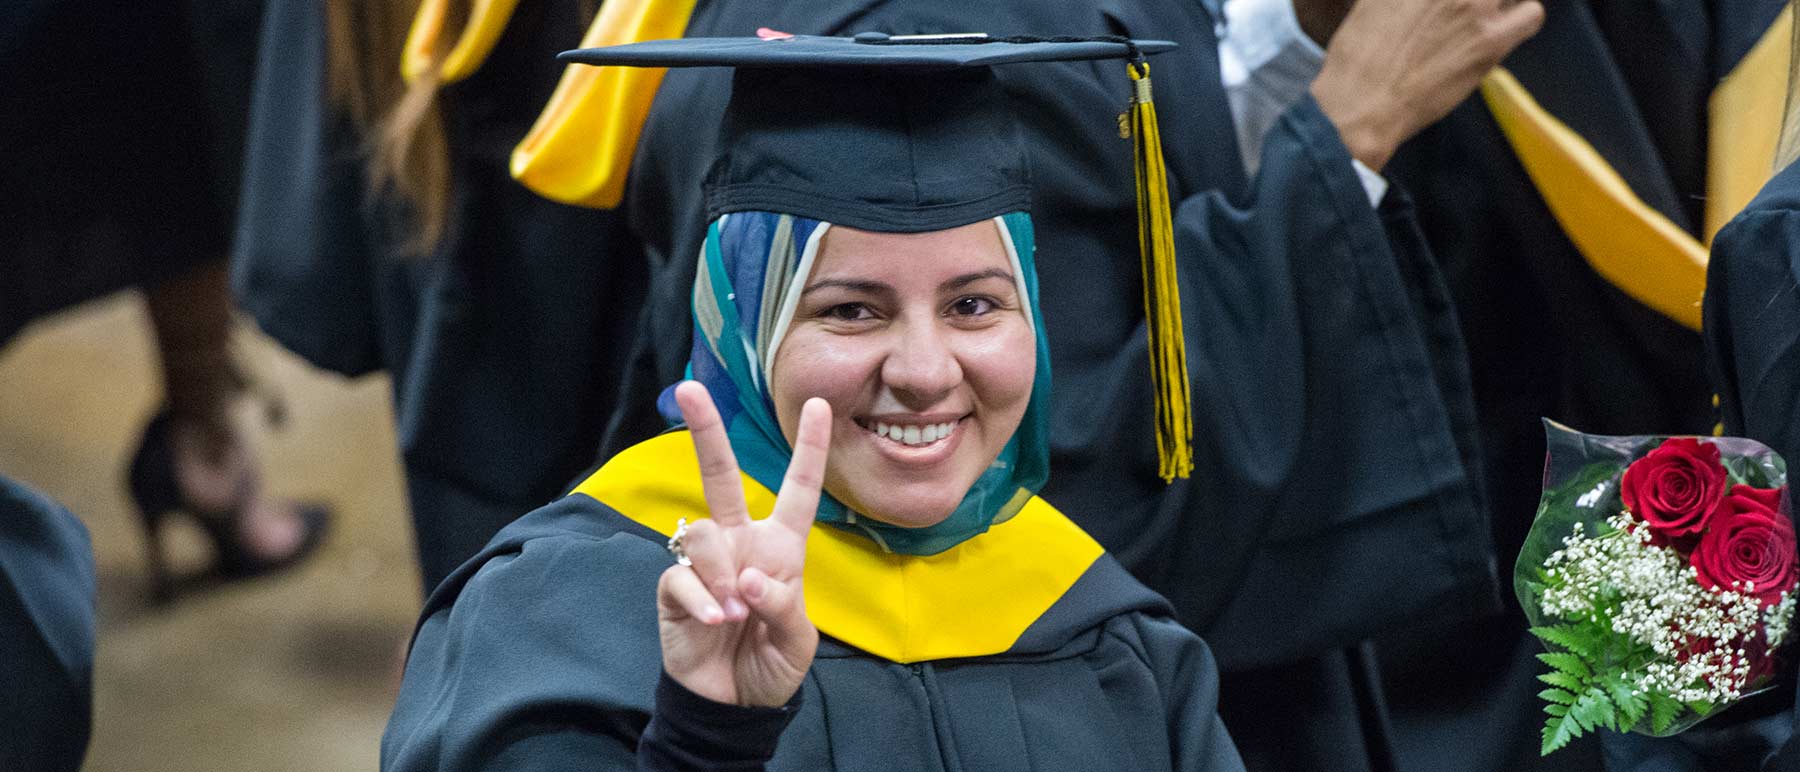 a v. c. u. graduate holding up a peace sign during the commencement ceremony